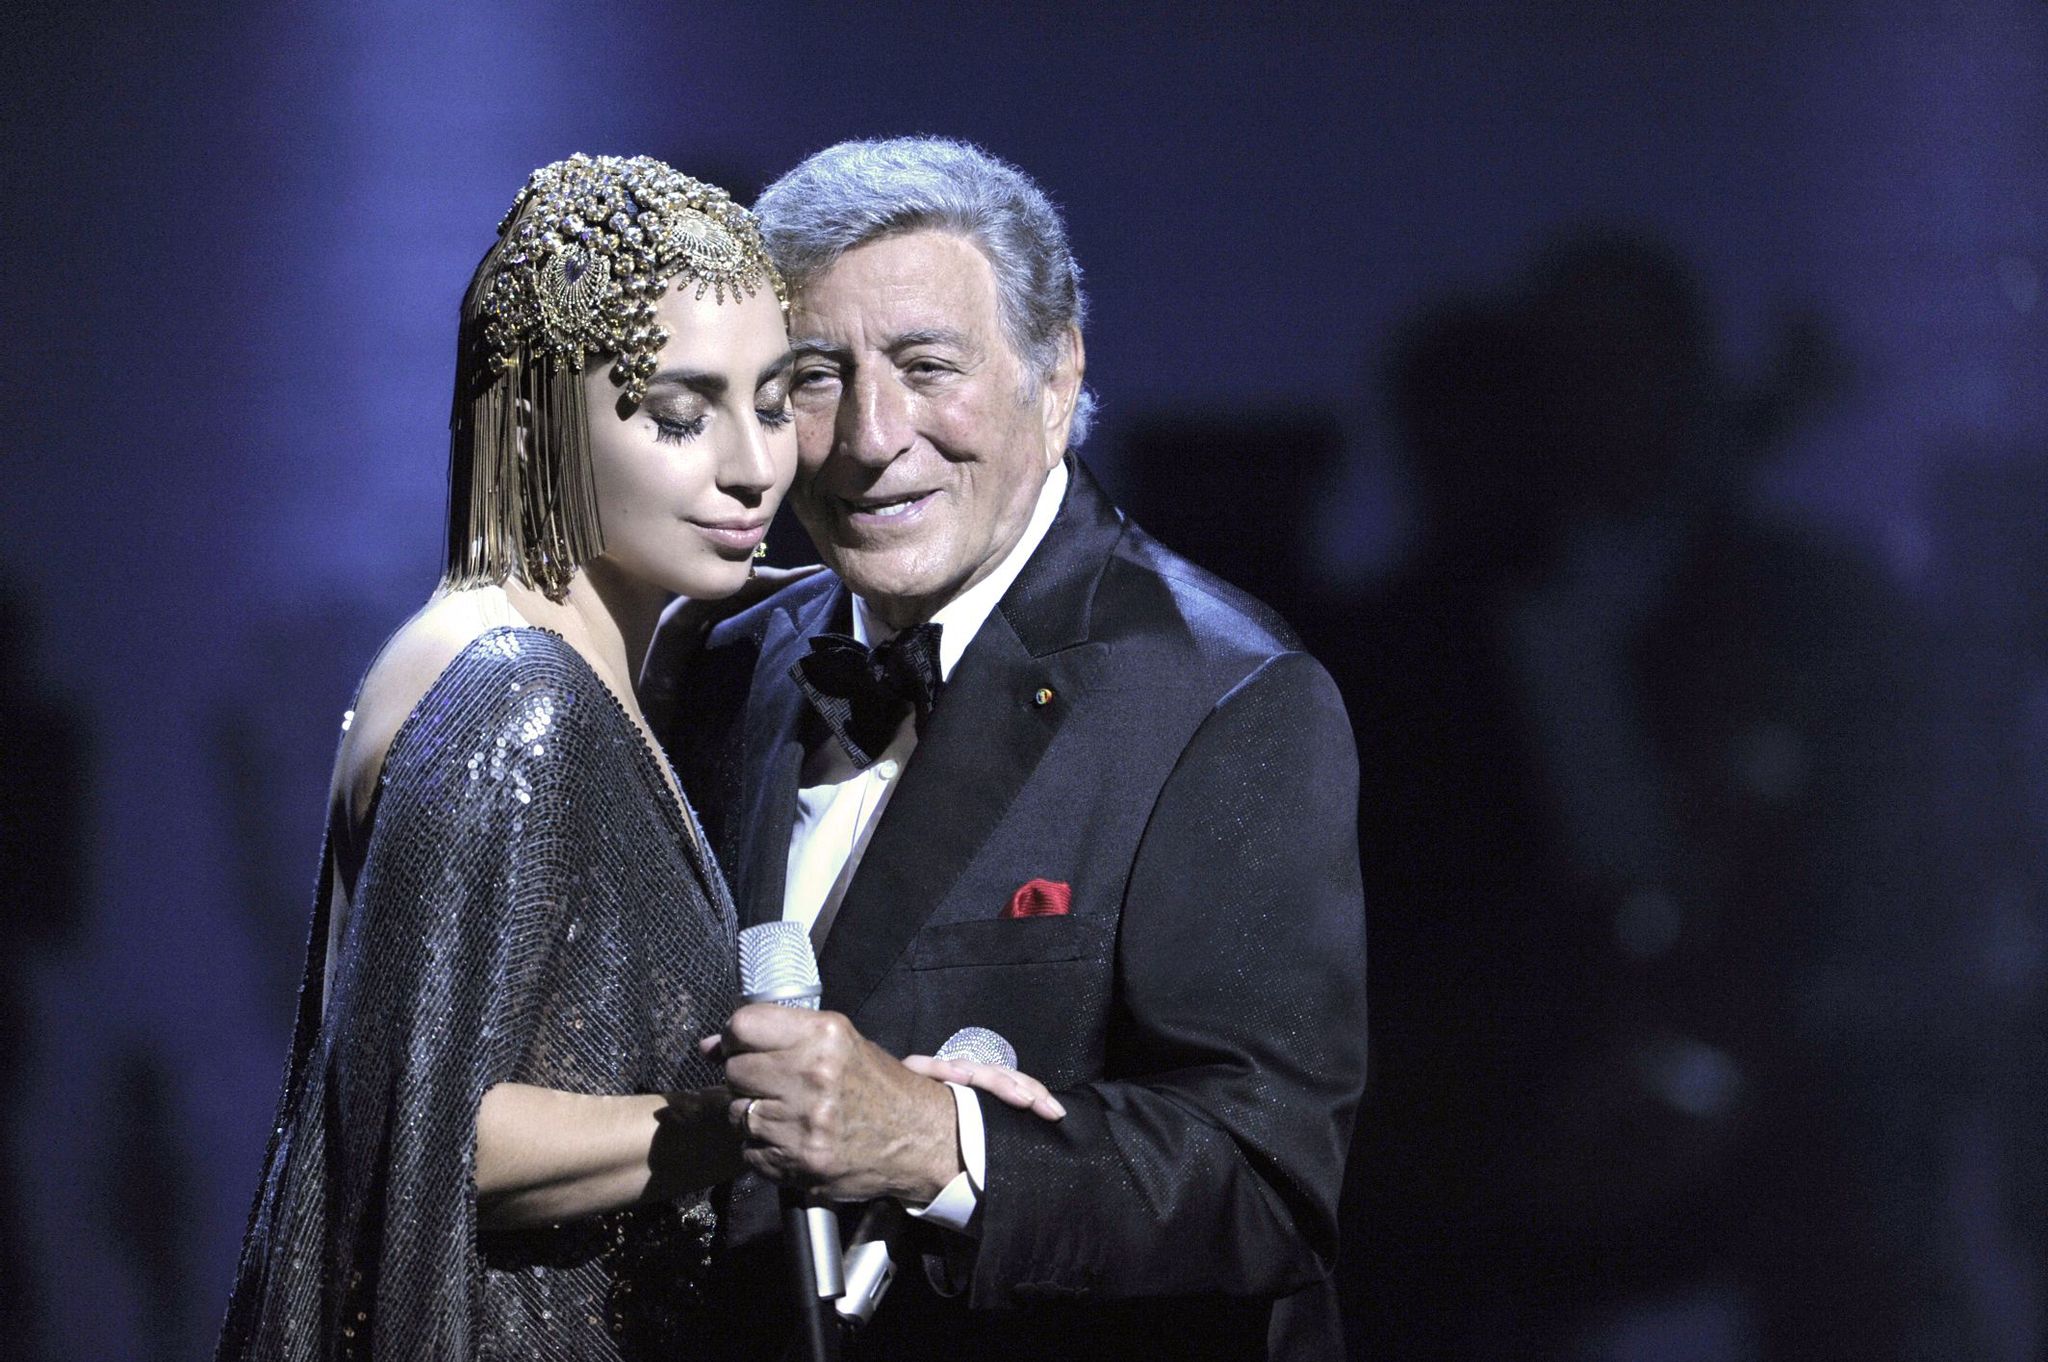 Tony Bennett and Lady Gaga in Great Performances (1971)